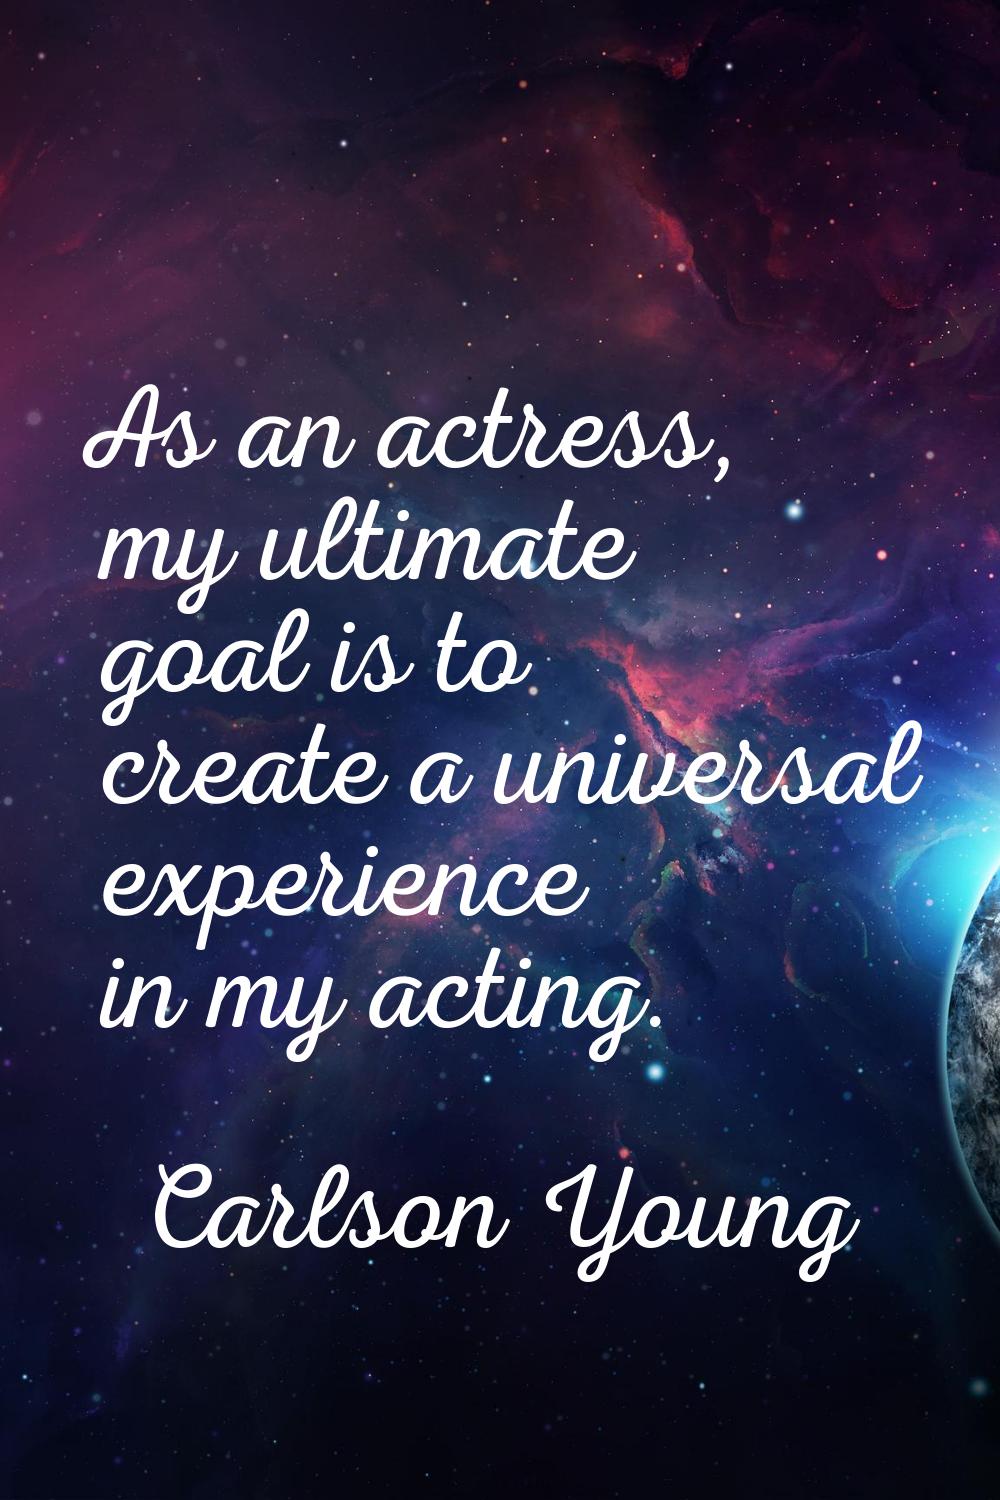 As an actress, my ultimate goal is to create a universal experience in my acting.